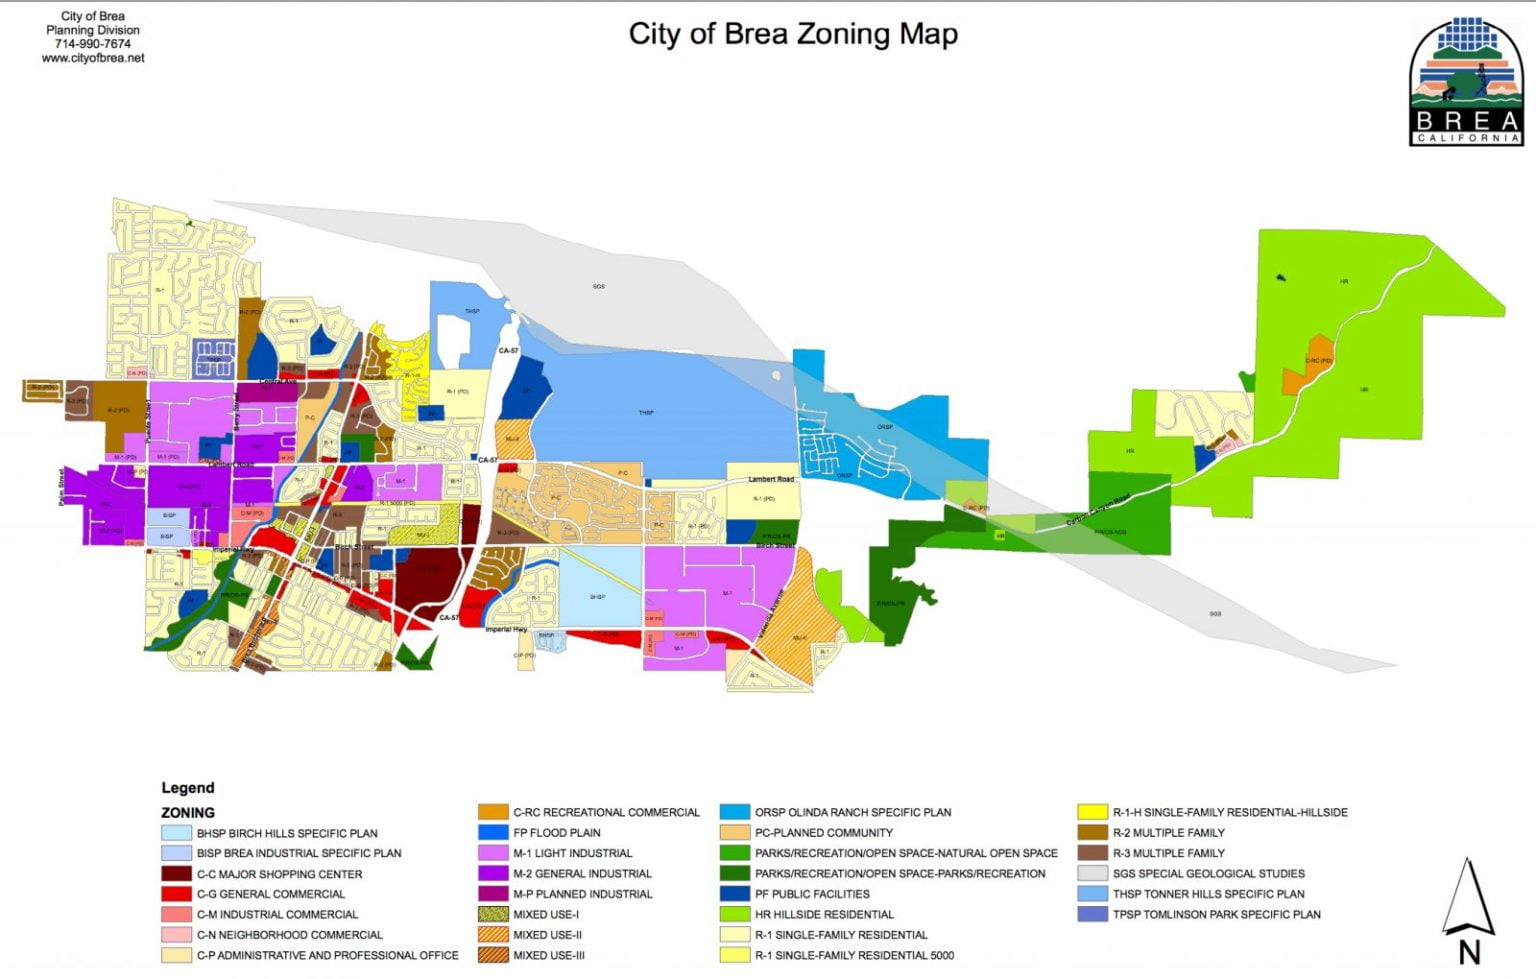 The City of Brea Zoning Map